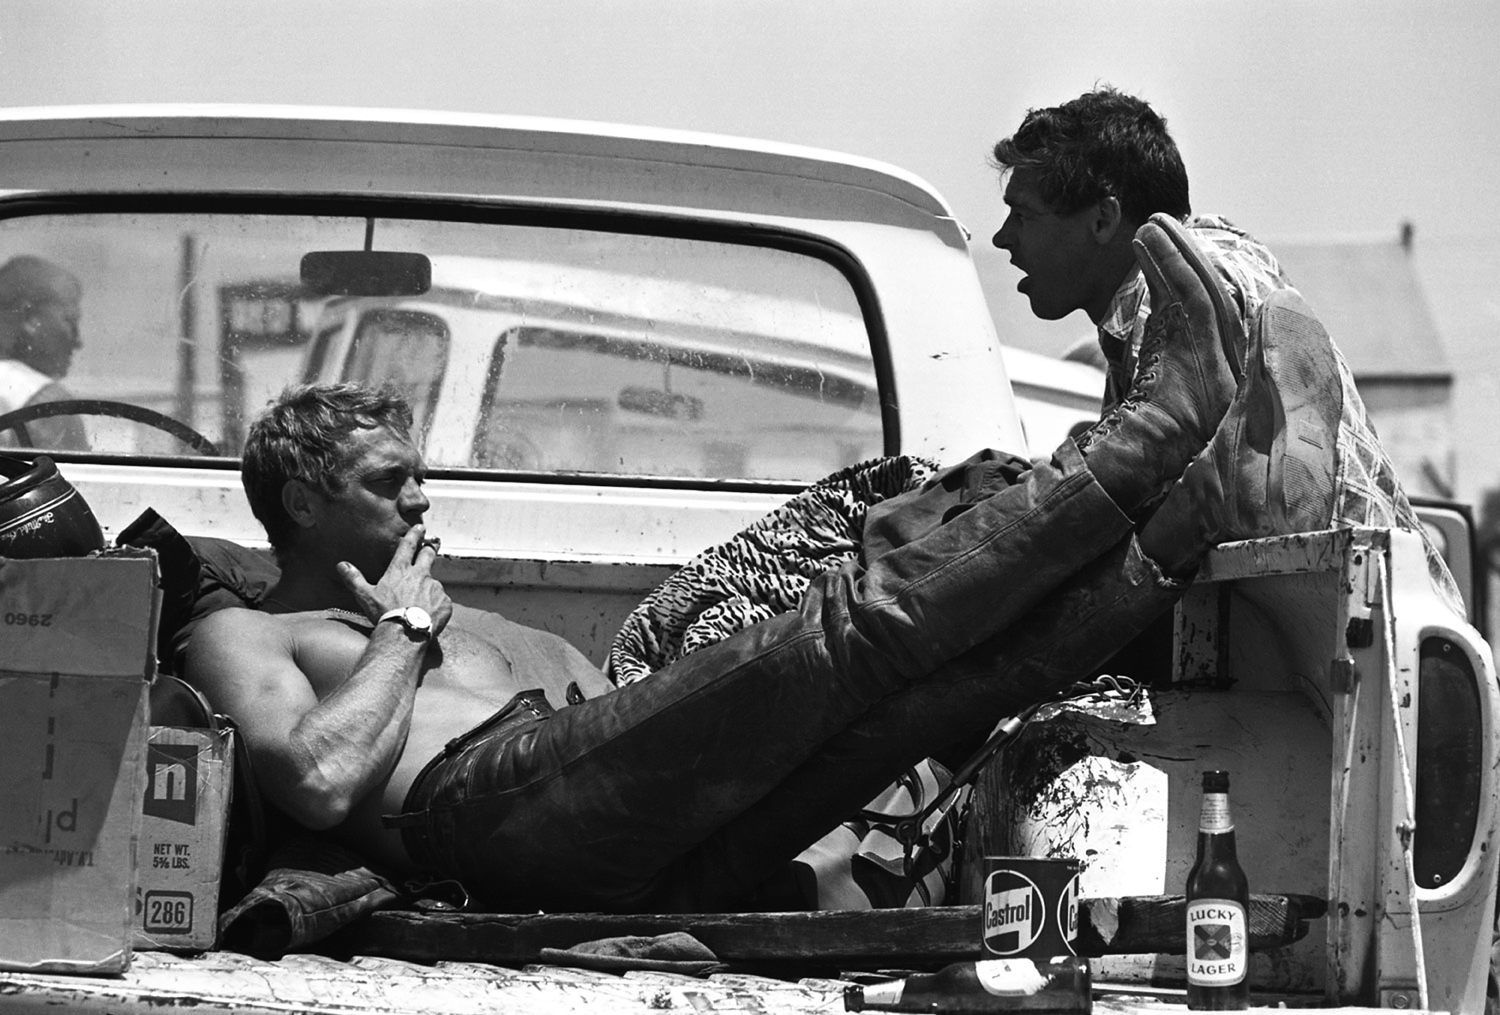 Steve McQueen kicking back after participated in a 500-mile, two-day dirt bike race across the Mojave Desert, 1963